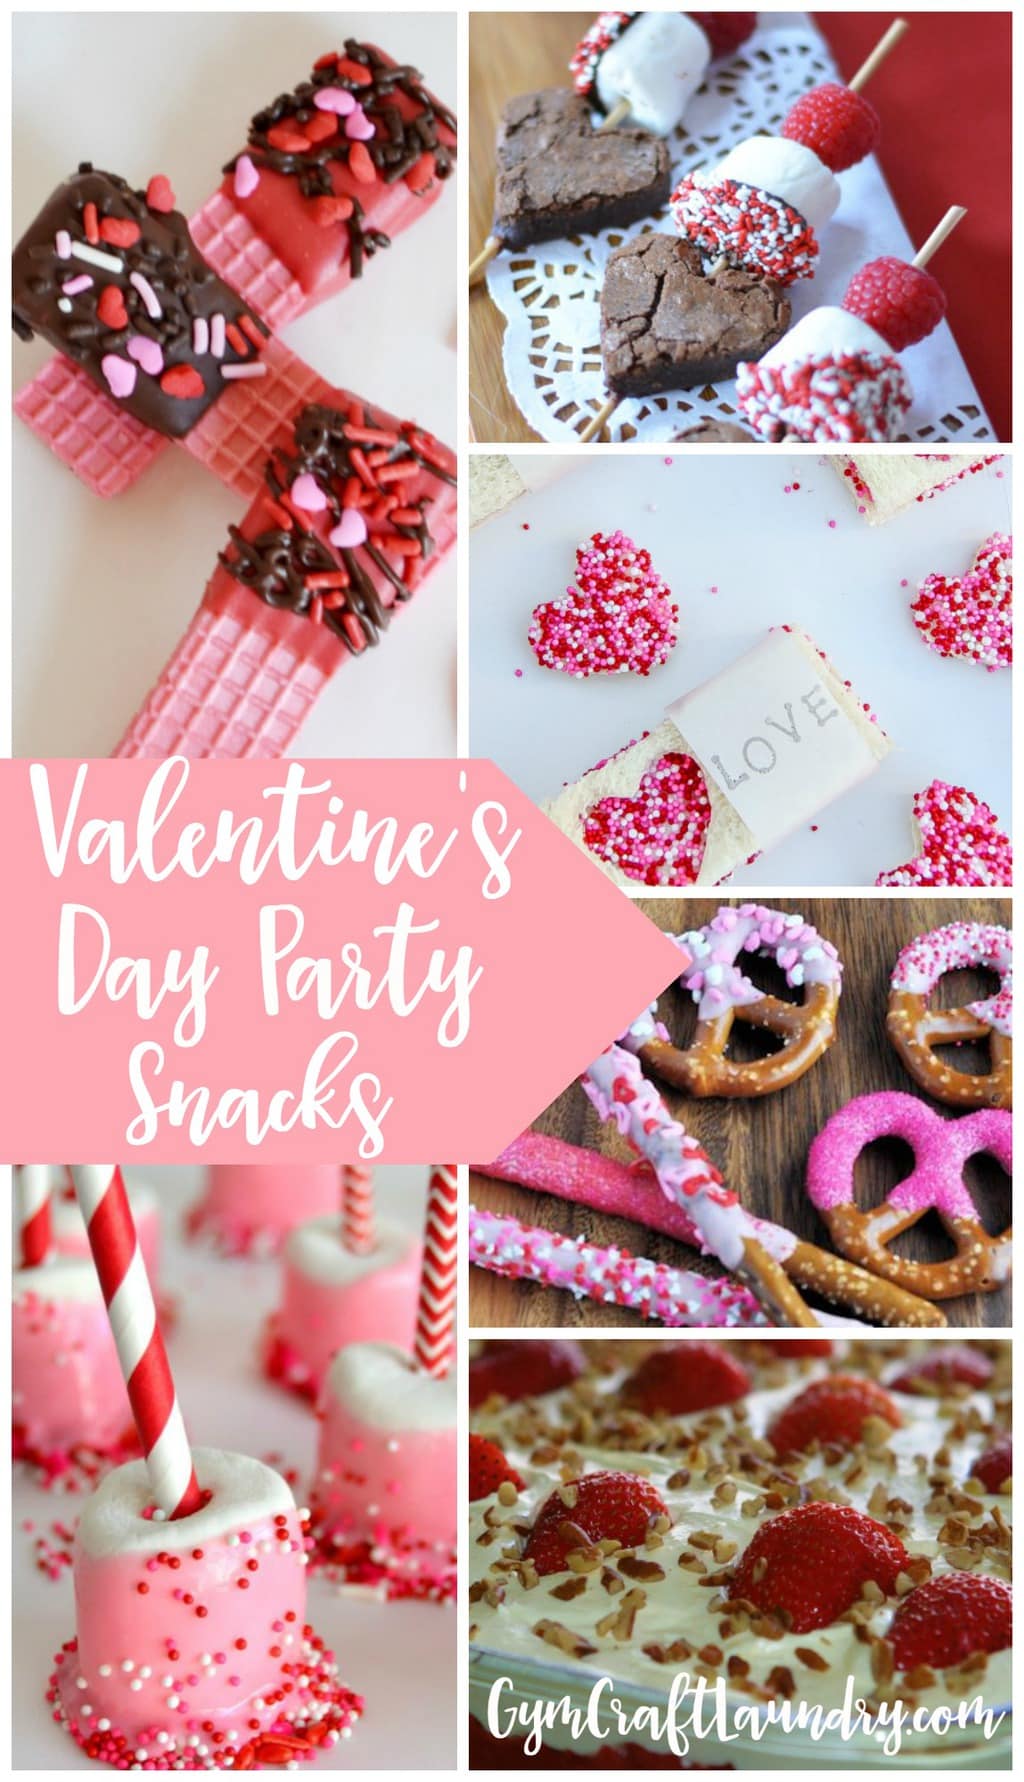 Valentine's Day Party Snacks to wow your guests